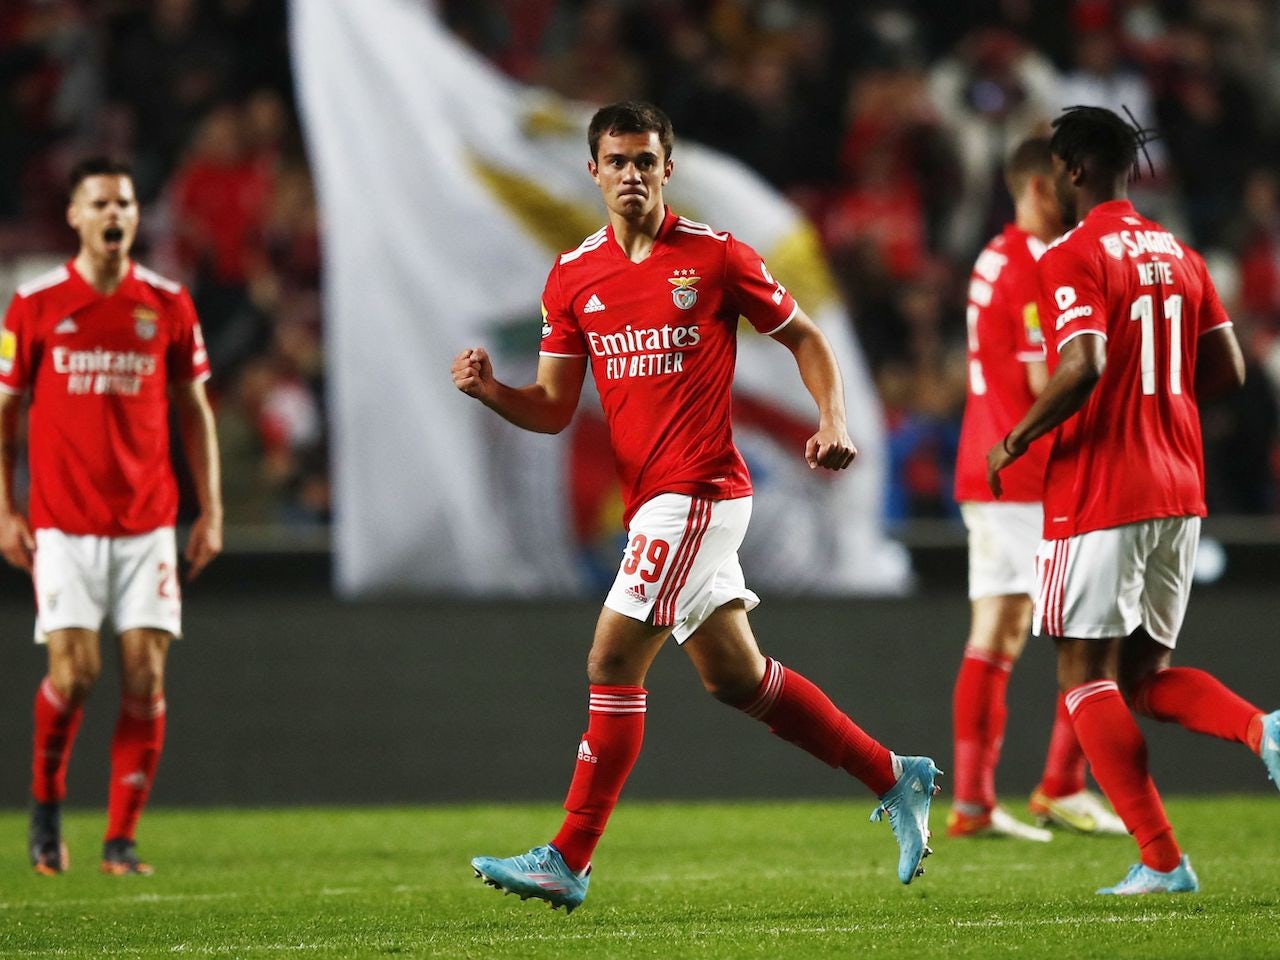 Benfica v estoril betting preview uci road world championships 2022 betting